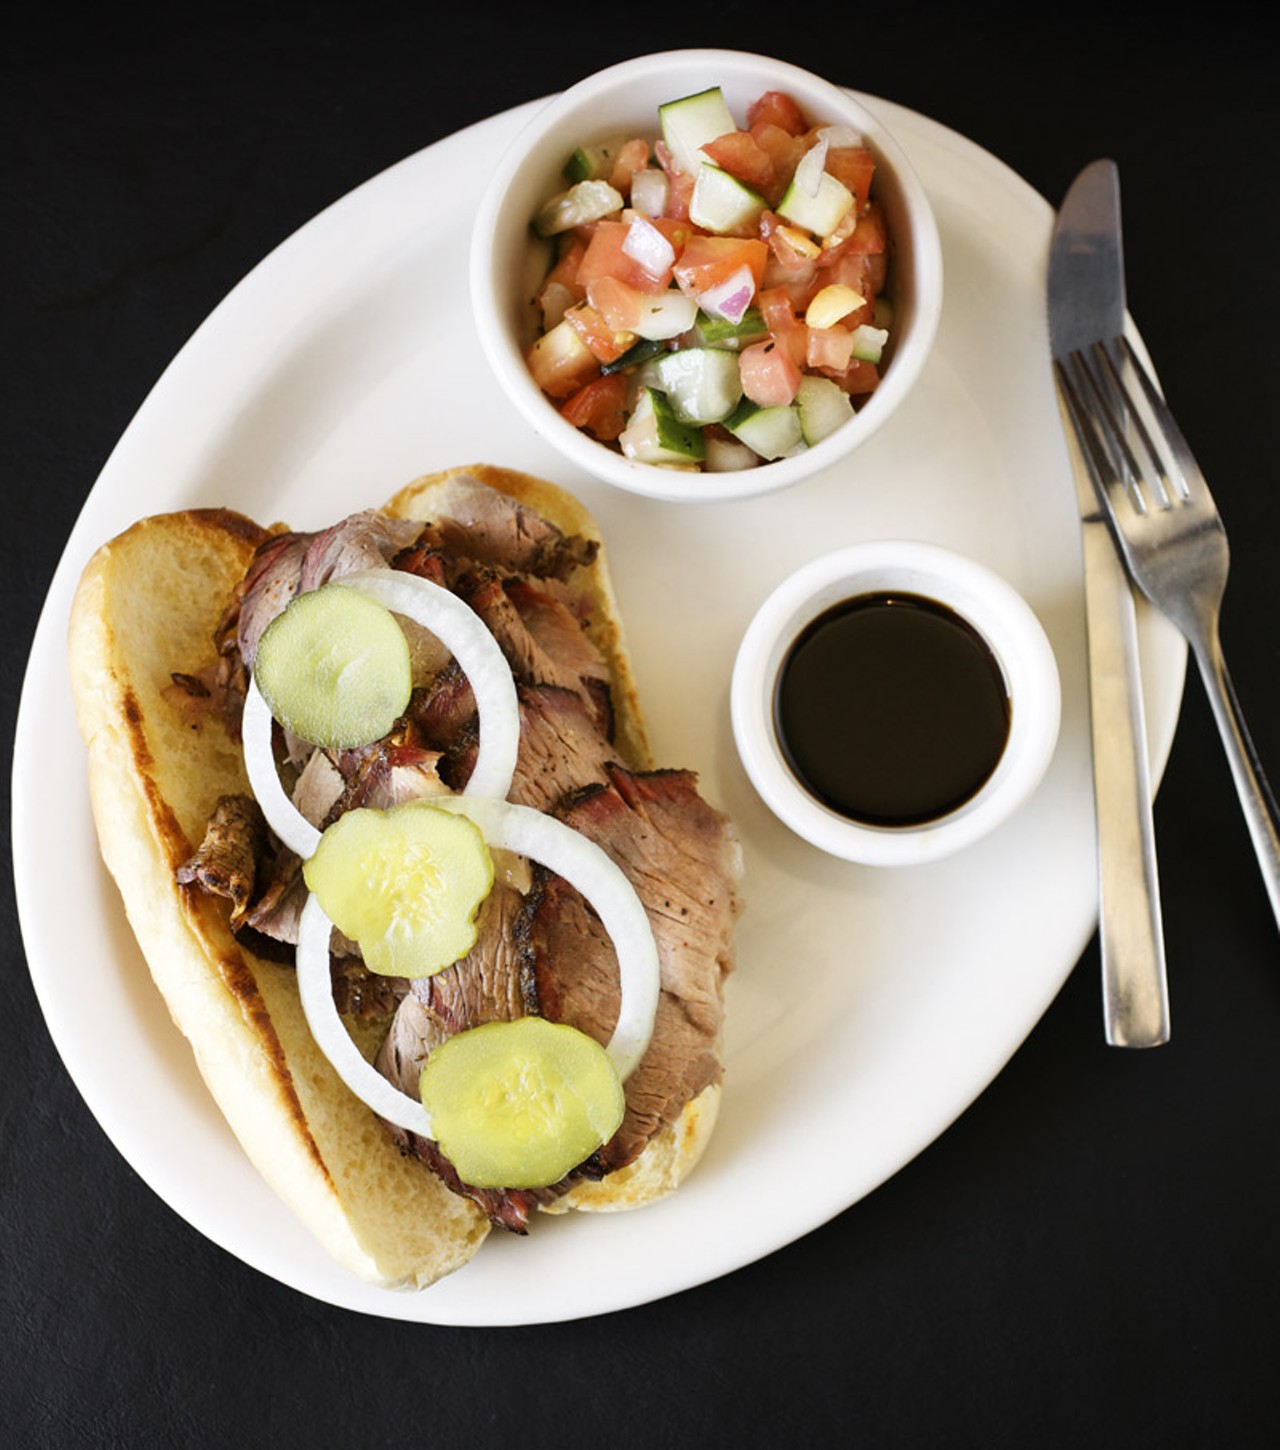 The beef brisket Sandwich at Flavors BBQ is made with marinated brisket, which is smoked and thinly sliced, shown here on the bread choice of a hoagie.